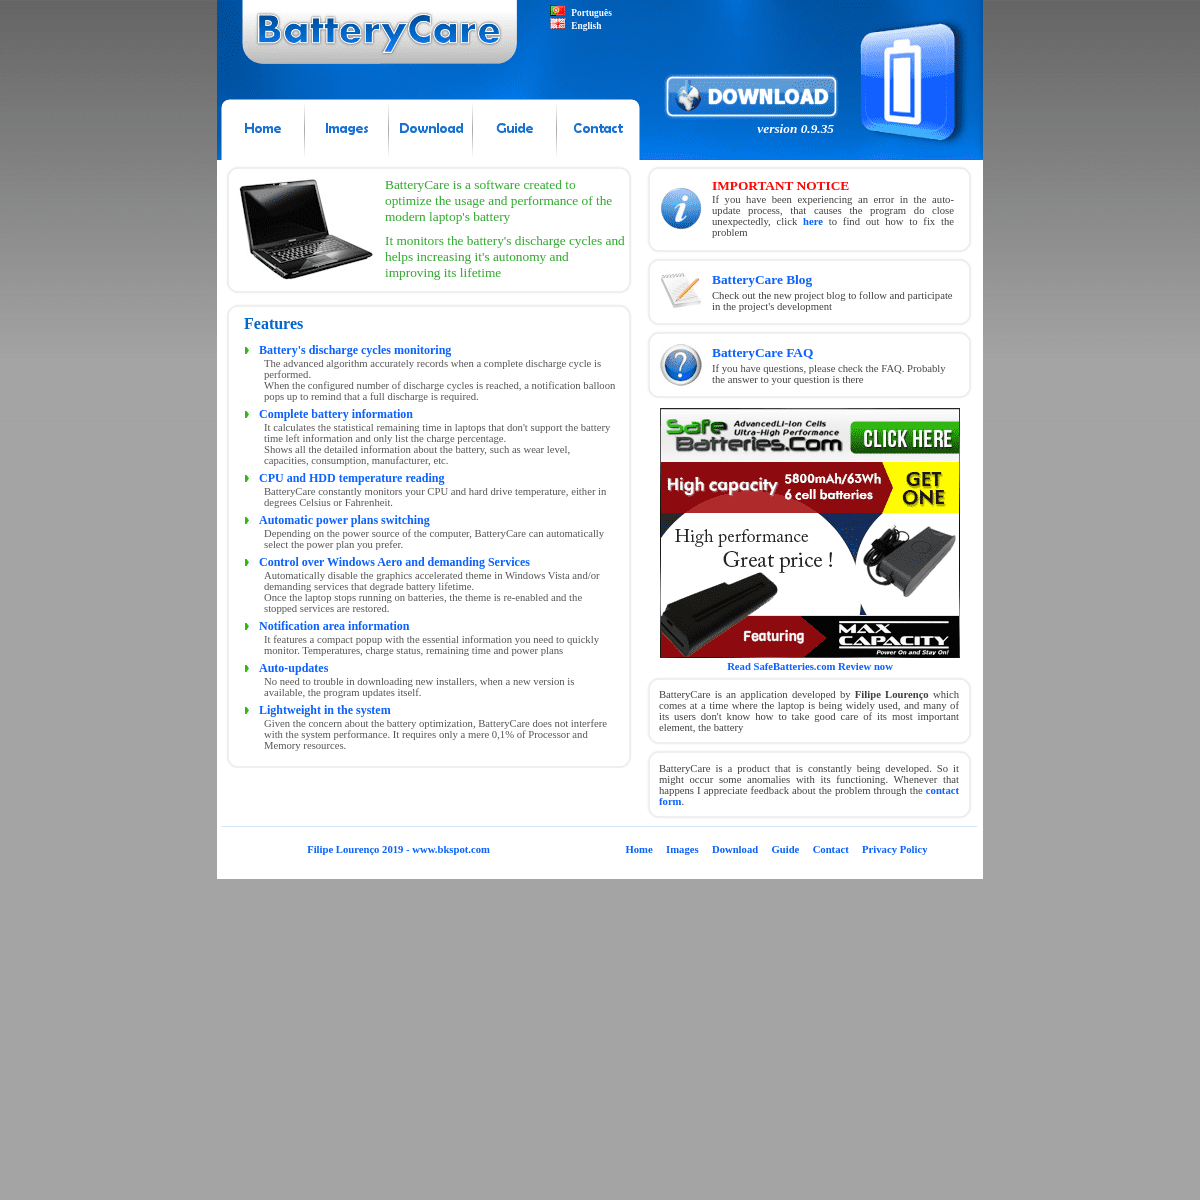 A complete backup of batterycare.net